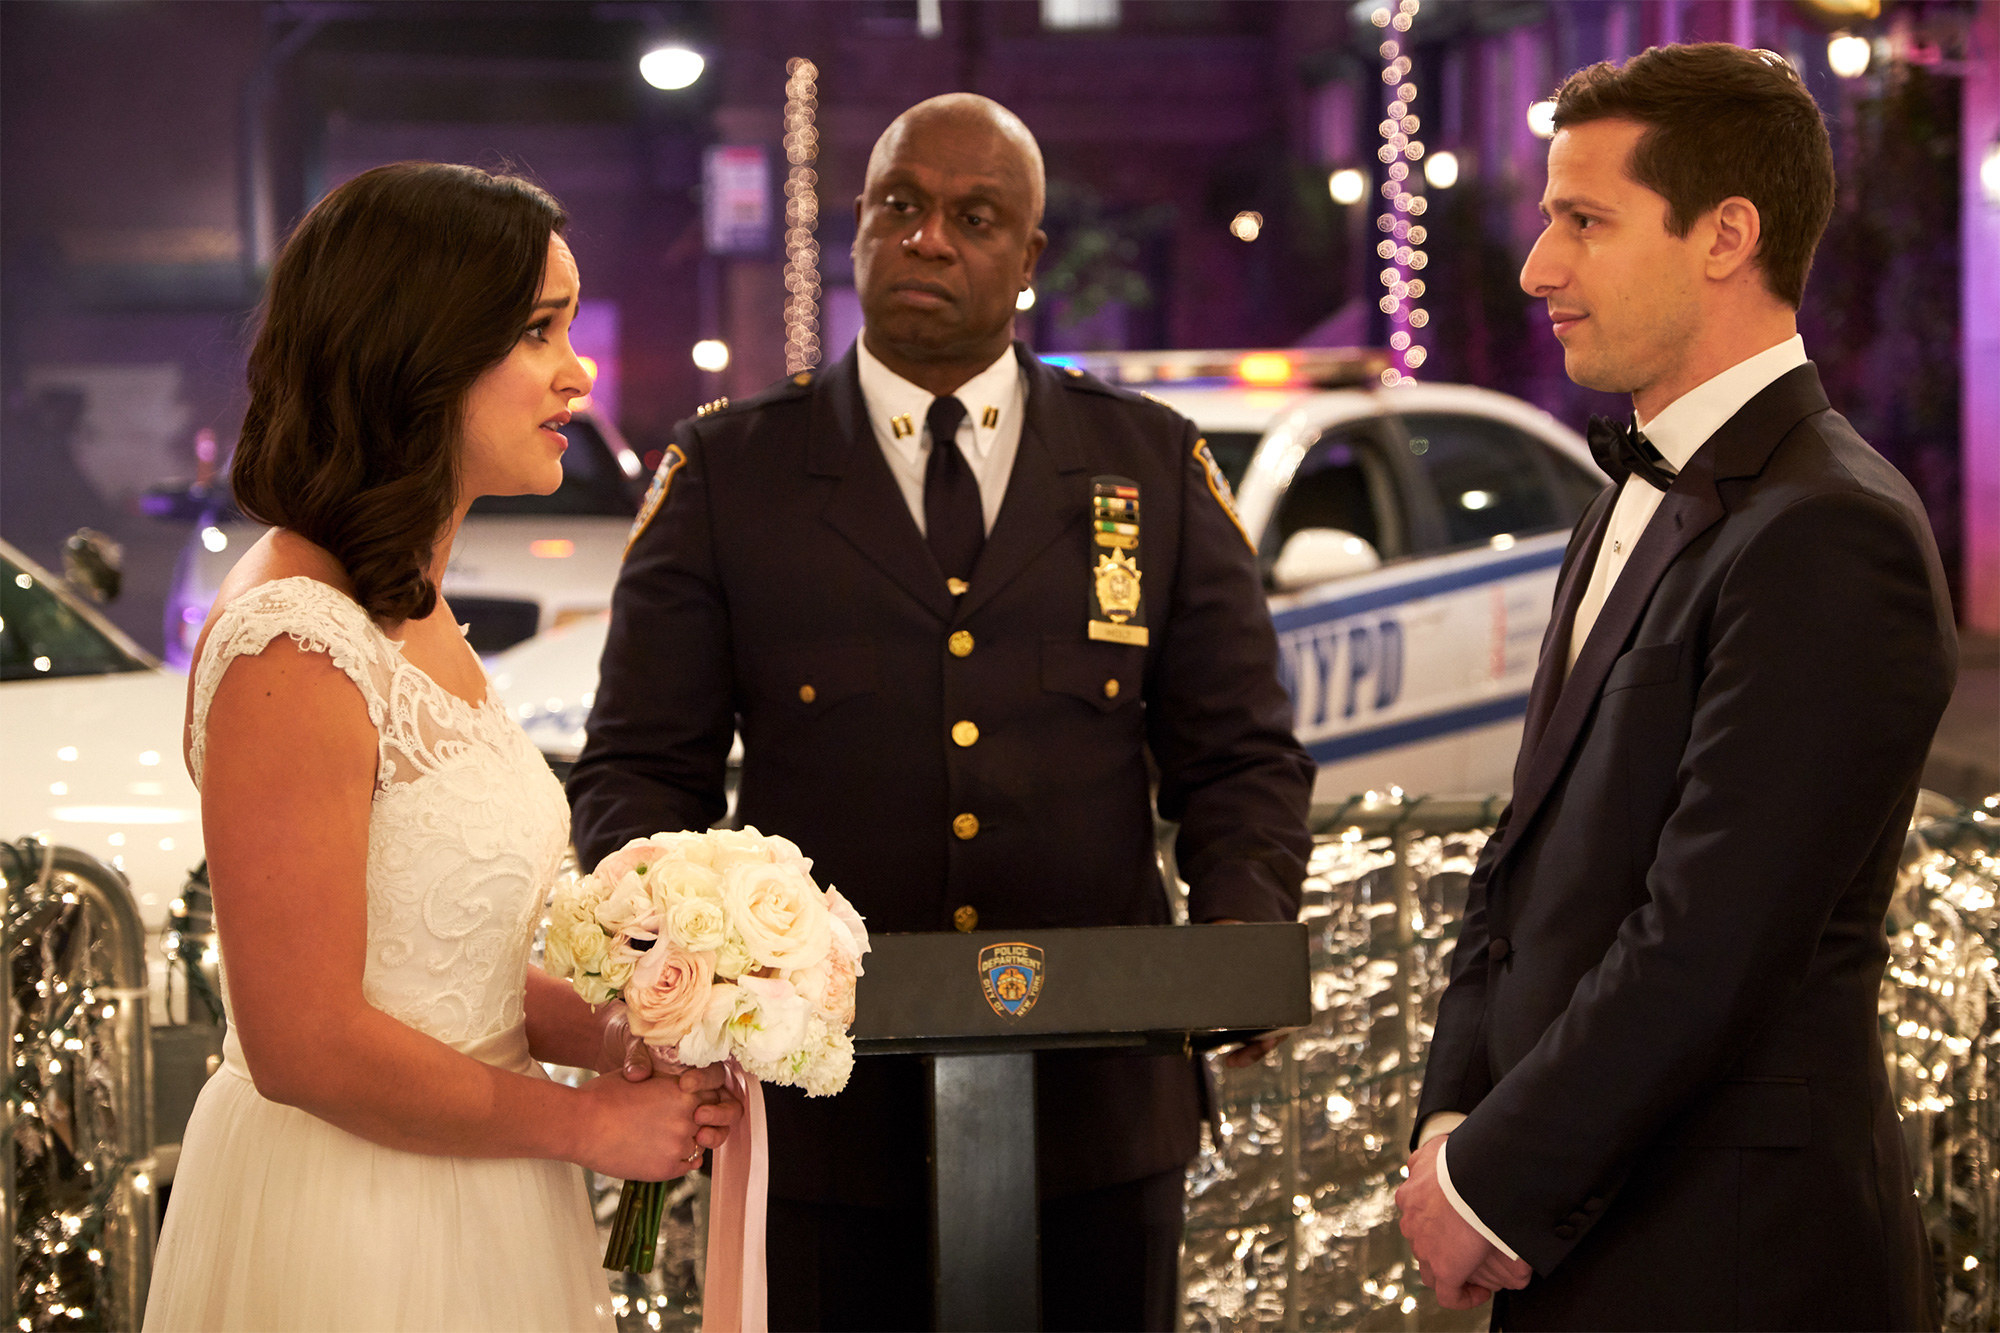 Andy Samberg as Jake Peralta marrying Melissa Fumero as Amy Santiago with Andre Braugher as Captain Holt ordaining in Brooklyn Nine-Nine